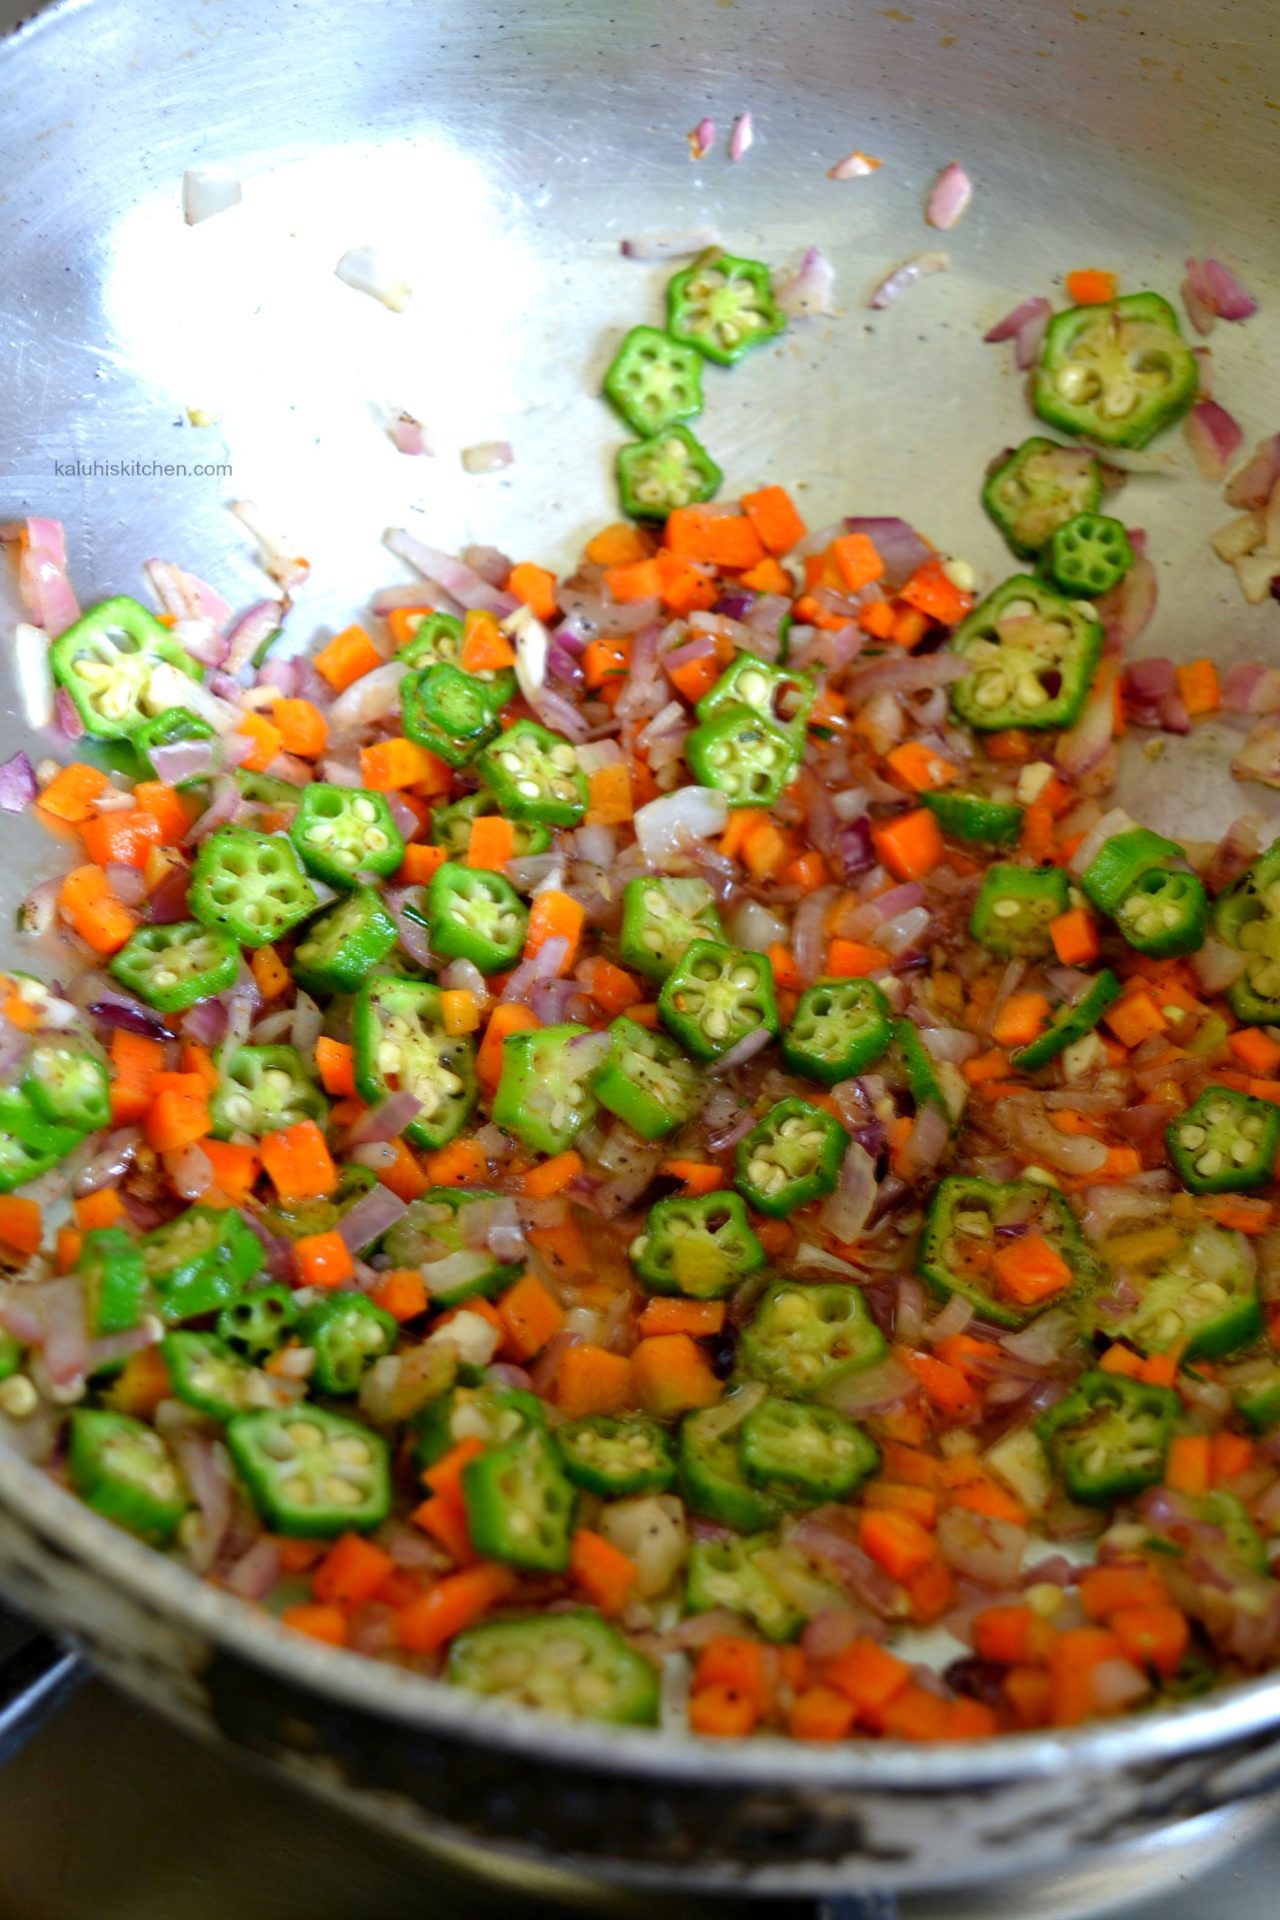 cook the okra together with the carrots until they have just softened_donot overcook yur okra_kaluhiskitchen.com